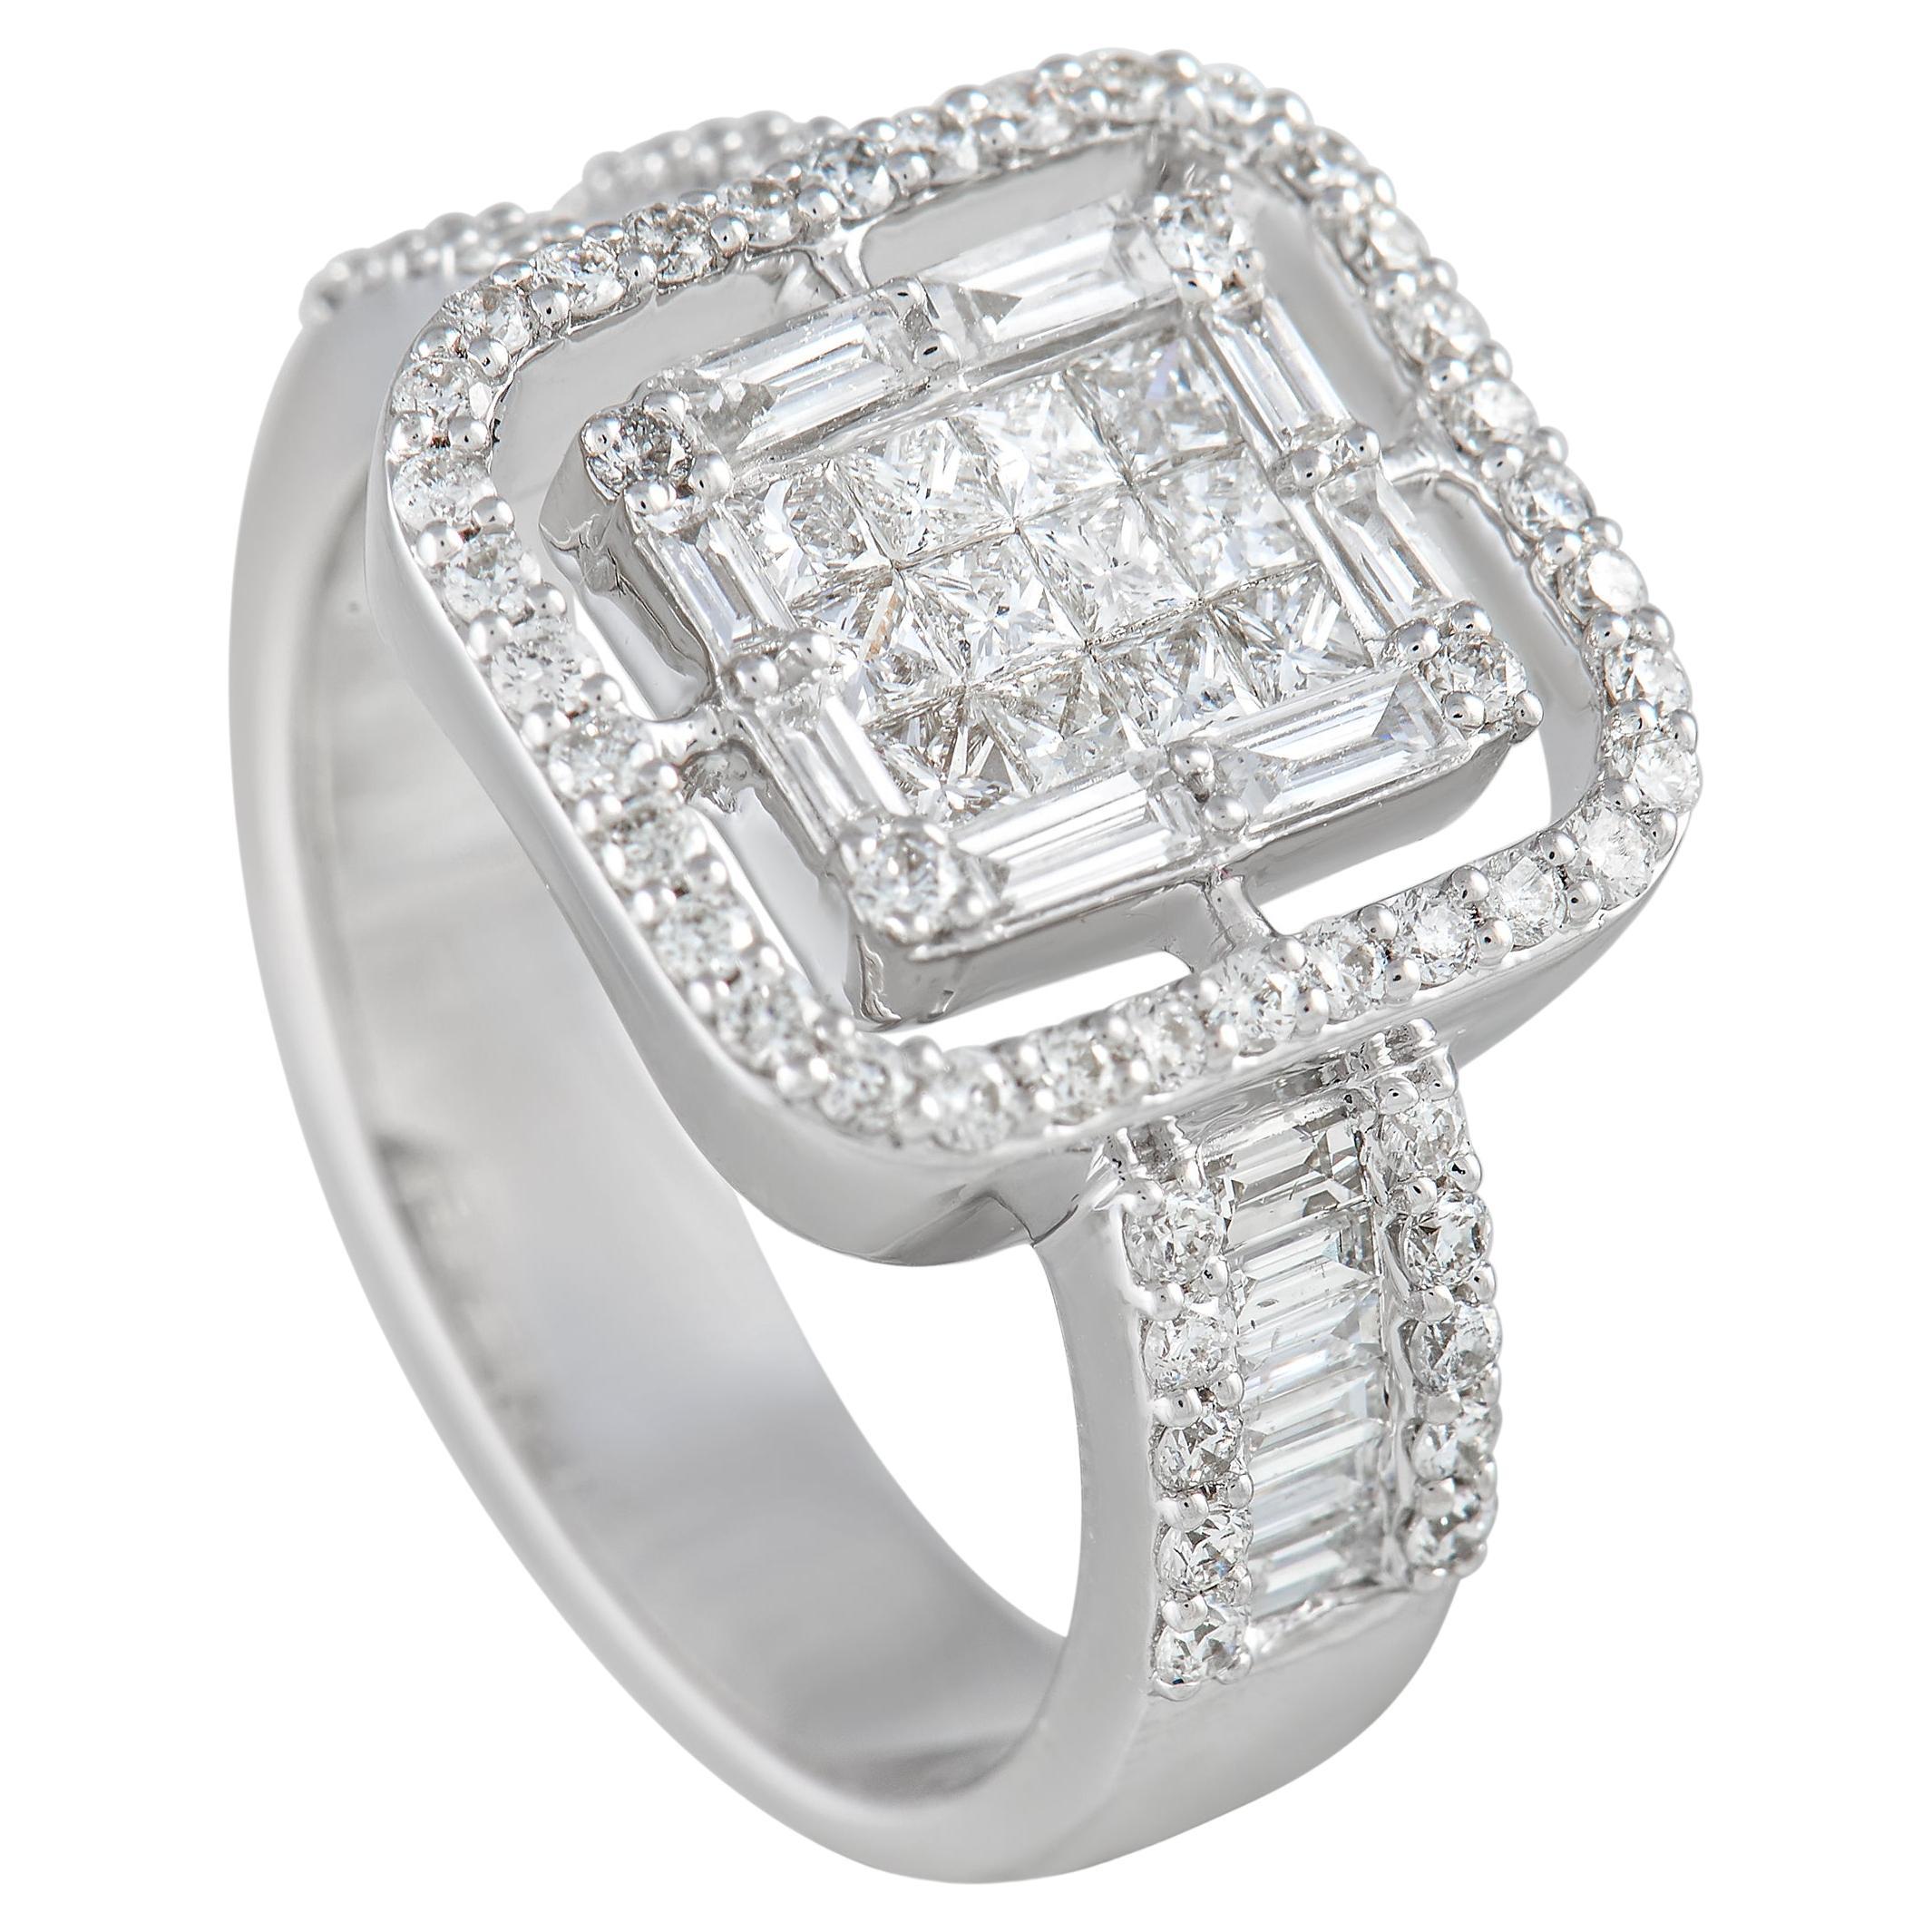 LB Exclusive 14K White Gold 1.28 ct Diamond Ring For Sale